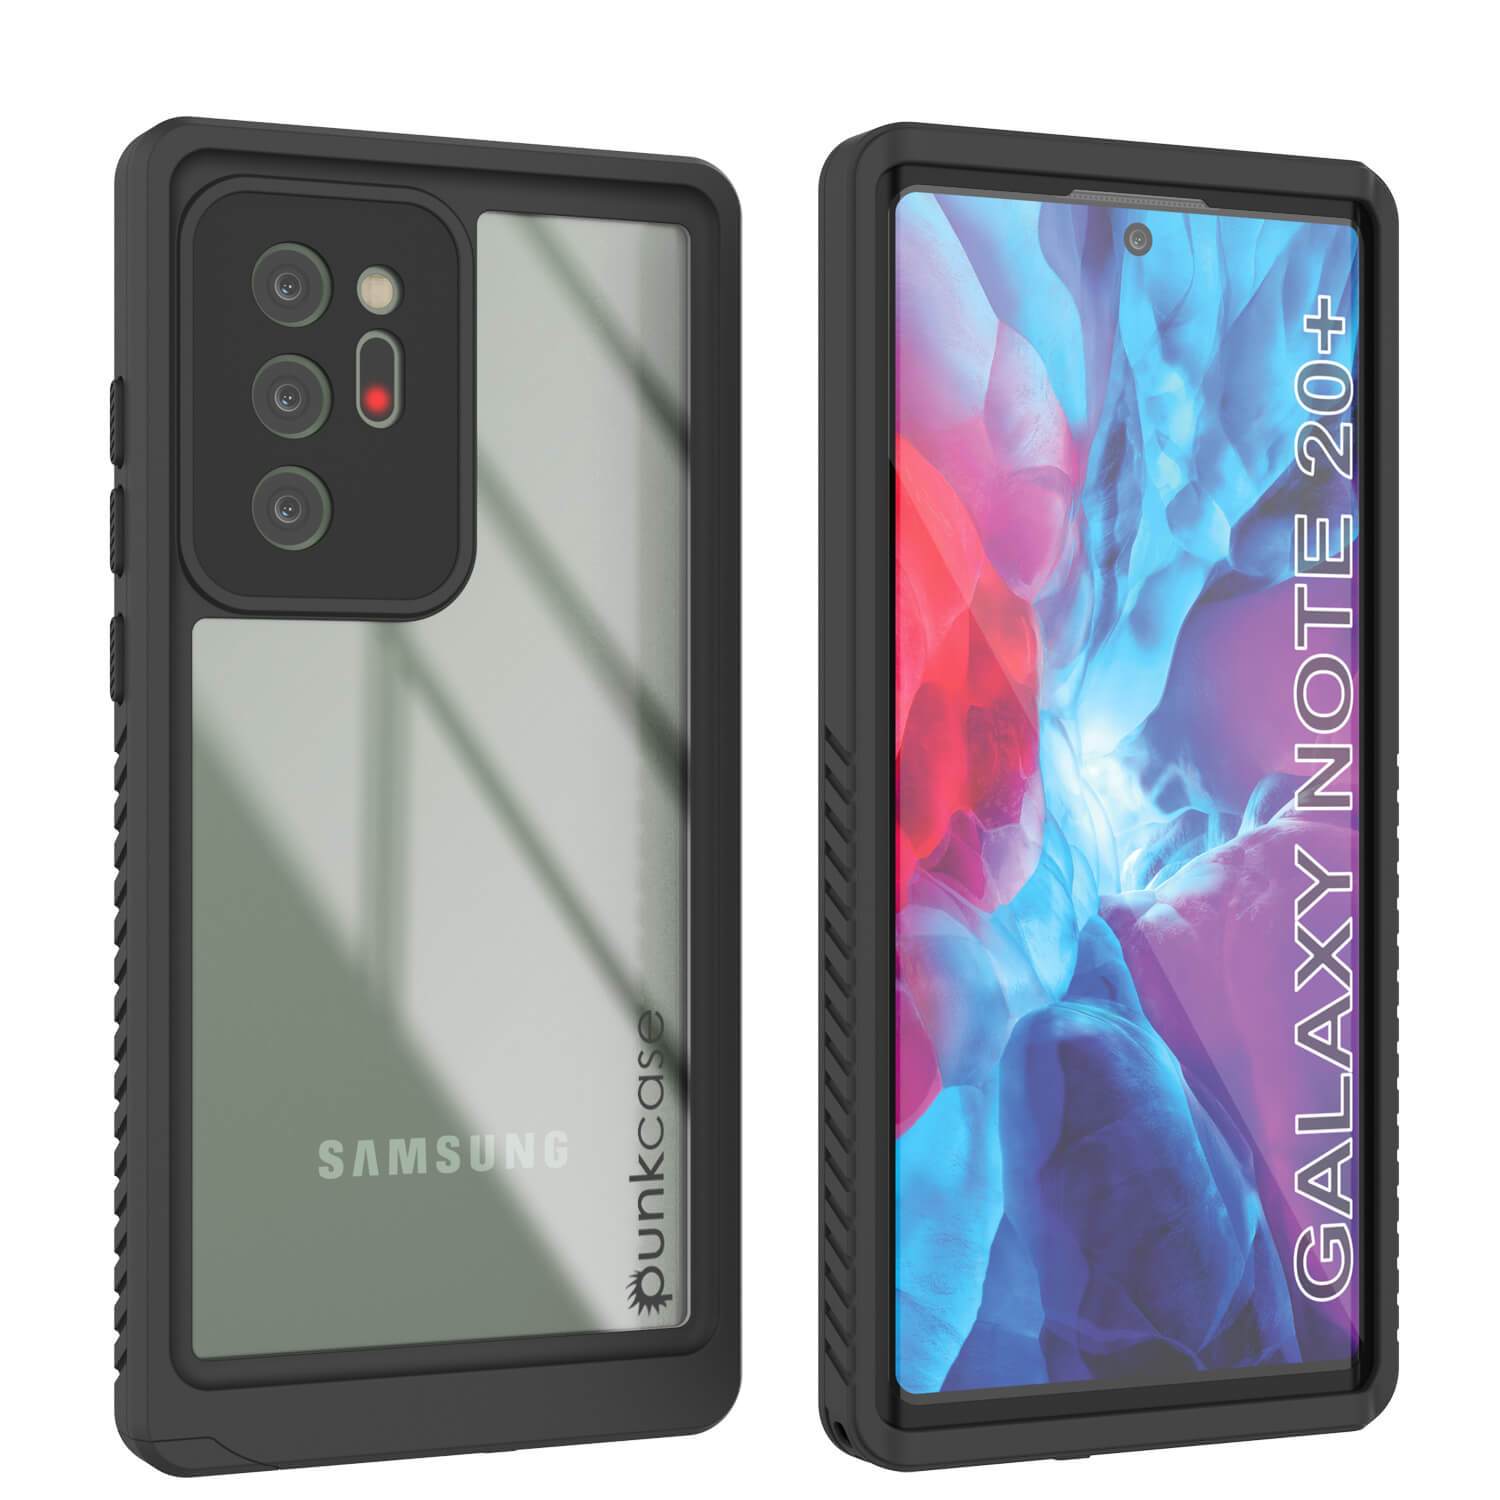 Galaxy Note 20 Ultra Case, Punkcase [Extreme Series] Armor Cover W/ Built In Screen Protector [Black]